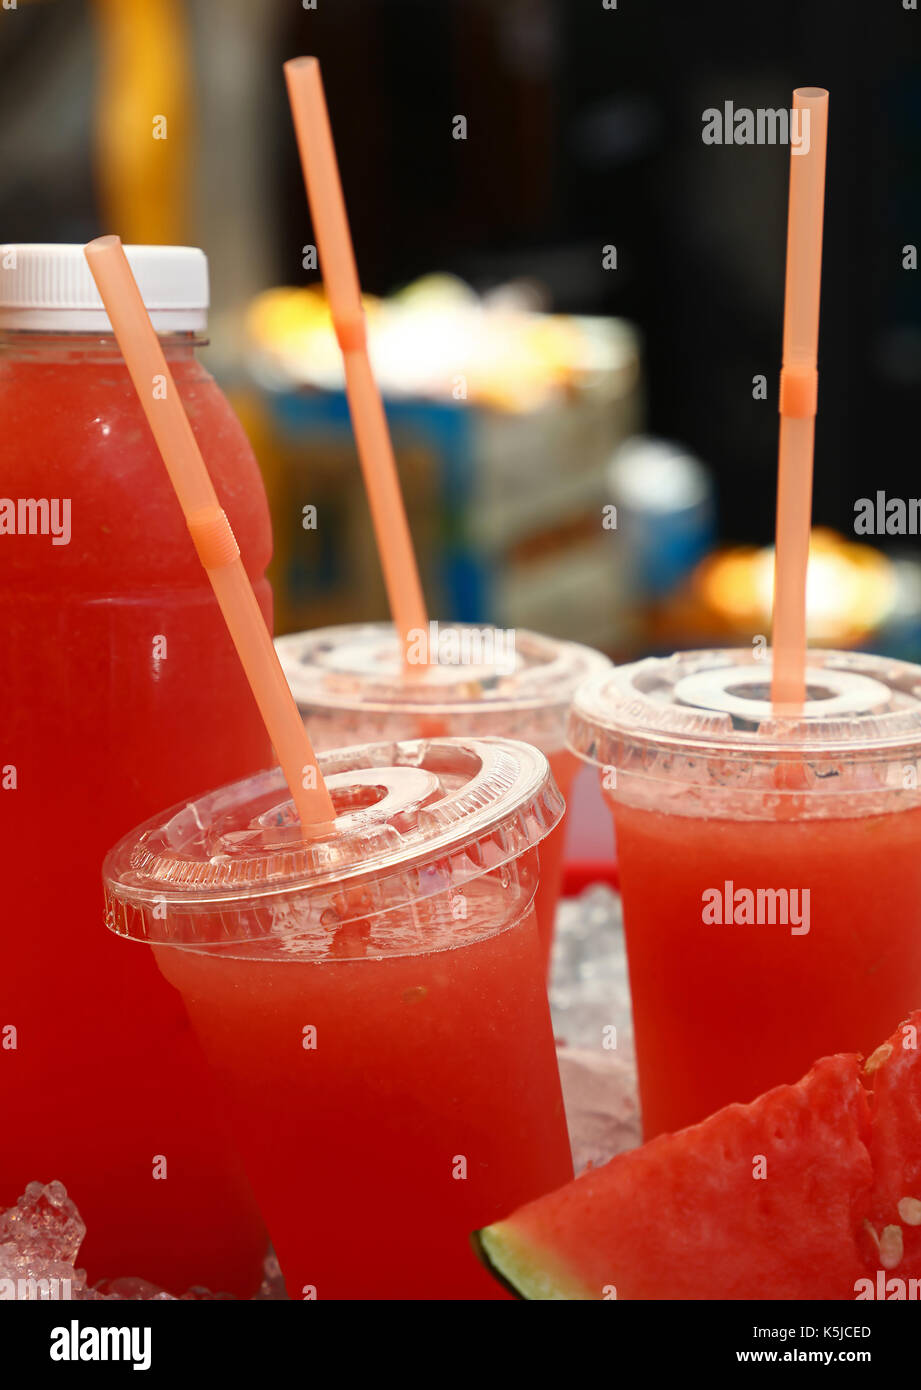 Fresh squeezed red ripe watermelon juice in plastic cups with straws and bottle on ice in retail market stall display, close up, low angle view Stock Photo